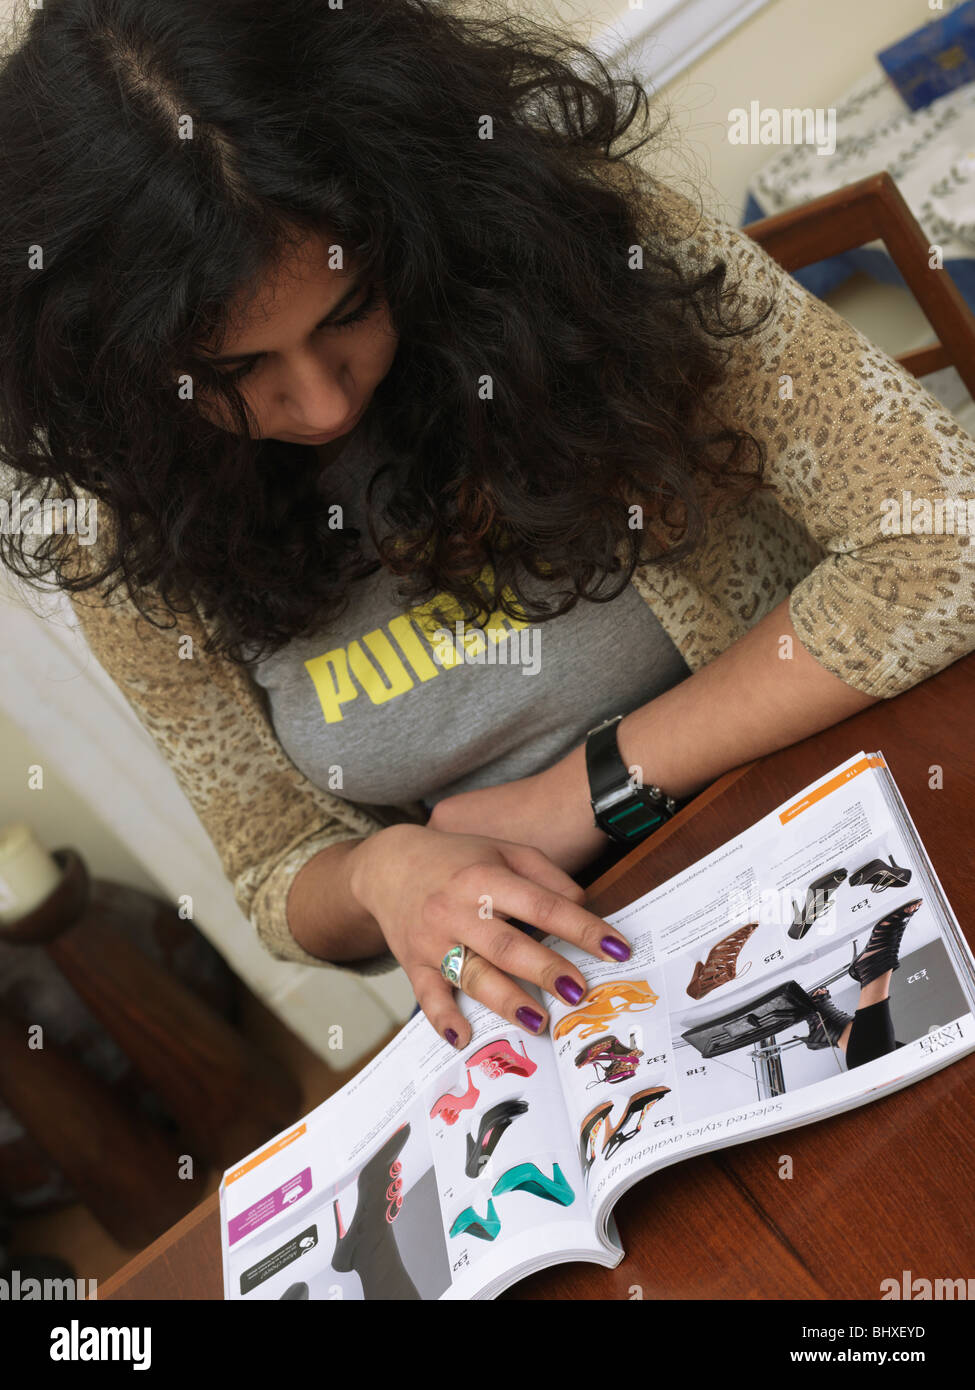 A Woman Looking Through a Mail Order Catalogue Stock Photo